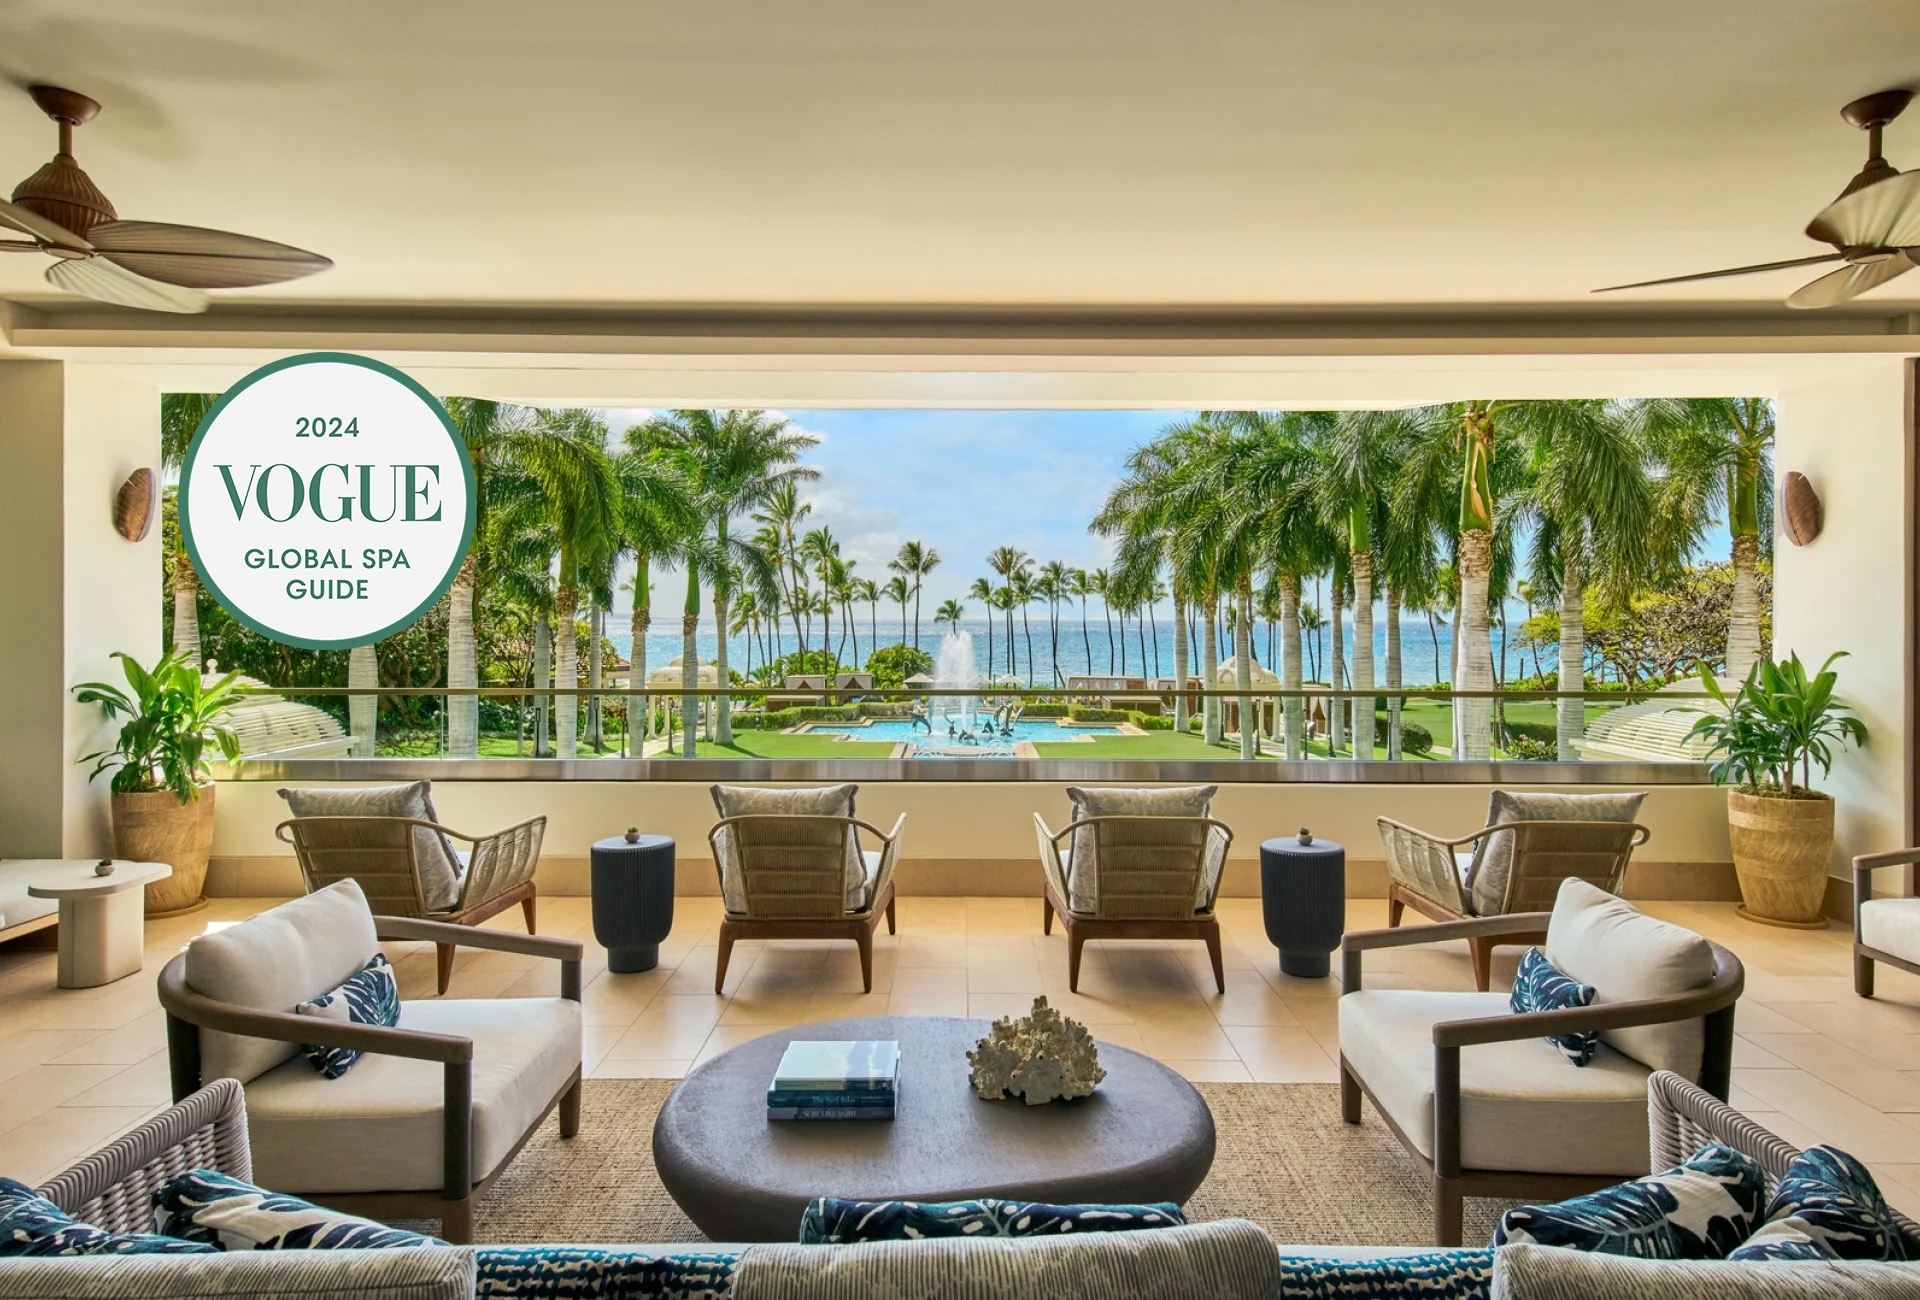 This is a beautiful image, showcasing the relaxing reflections lounge at the Grand Wailea hotel, overlooking the resort and the sea. 